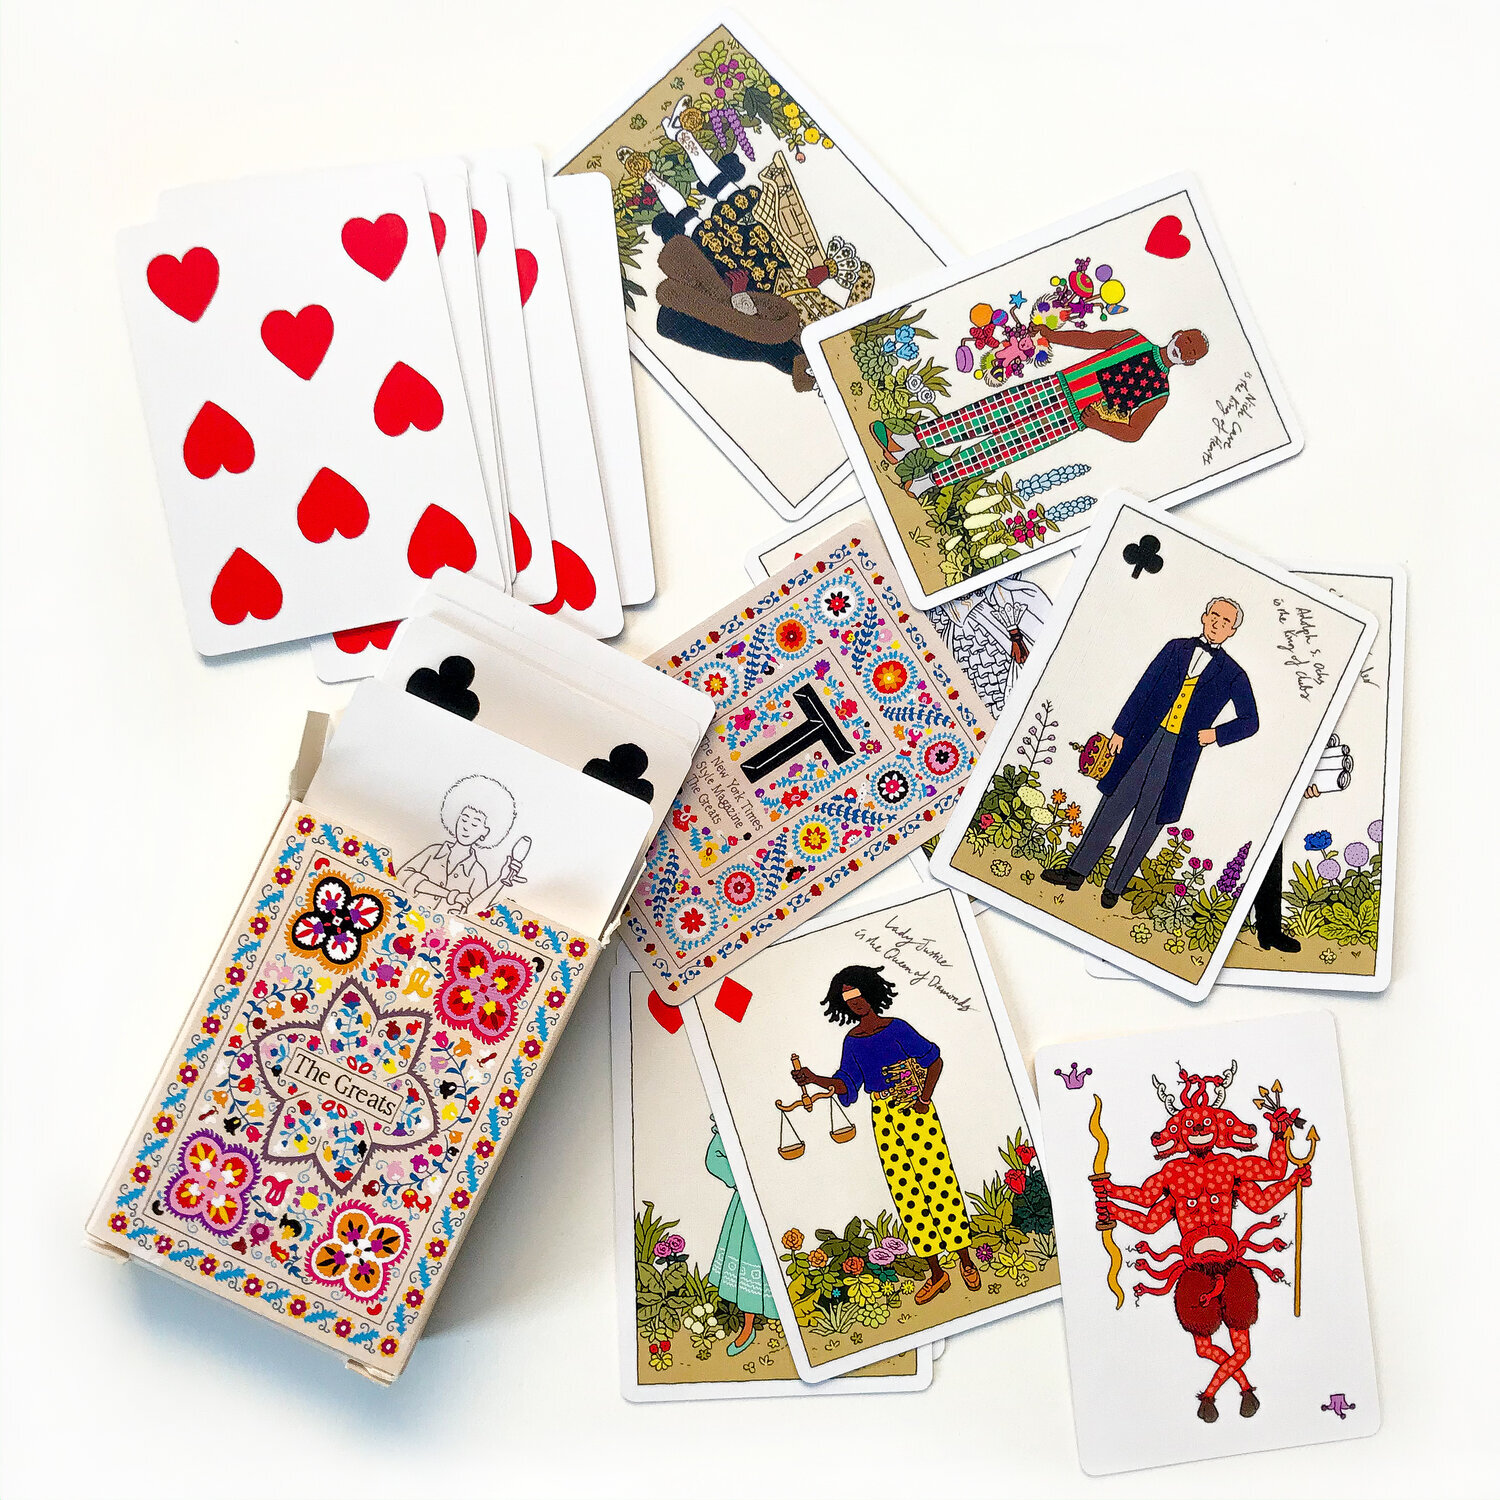 T Magazine, The Greats Playing Cards